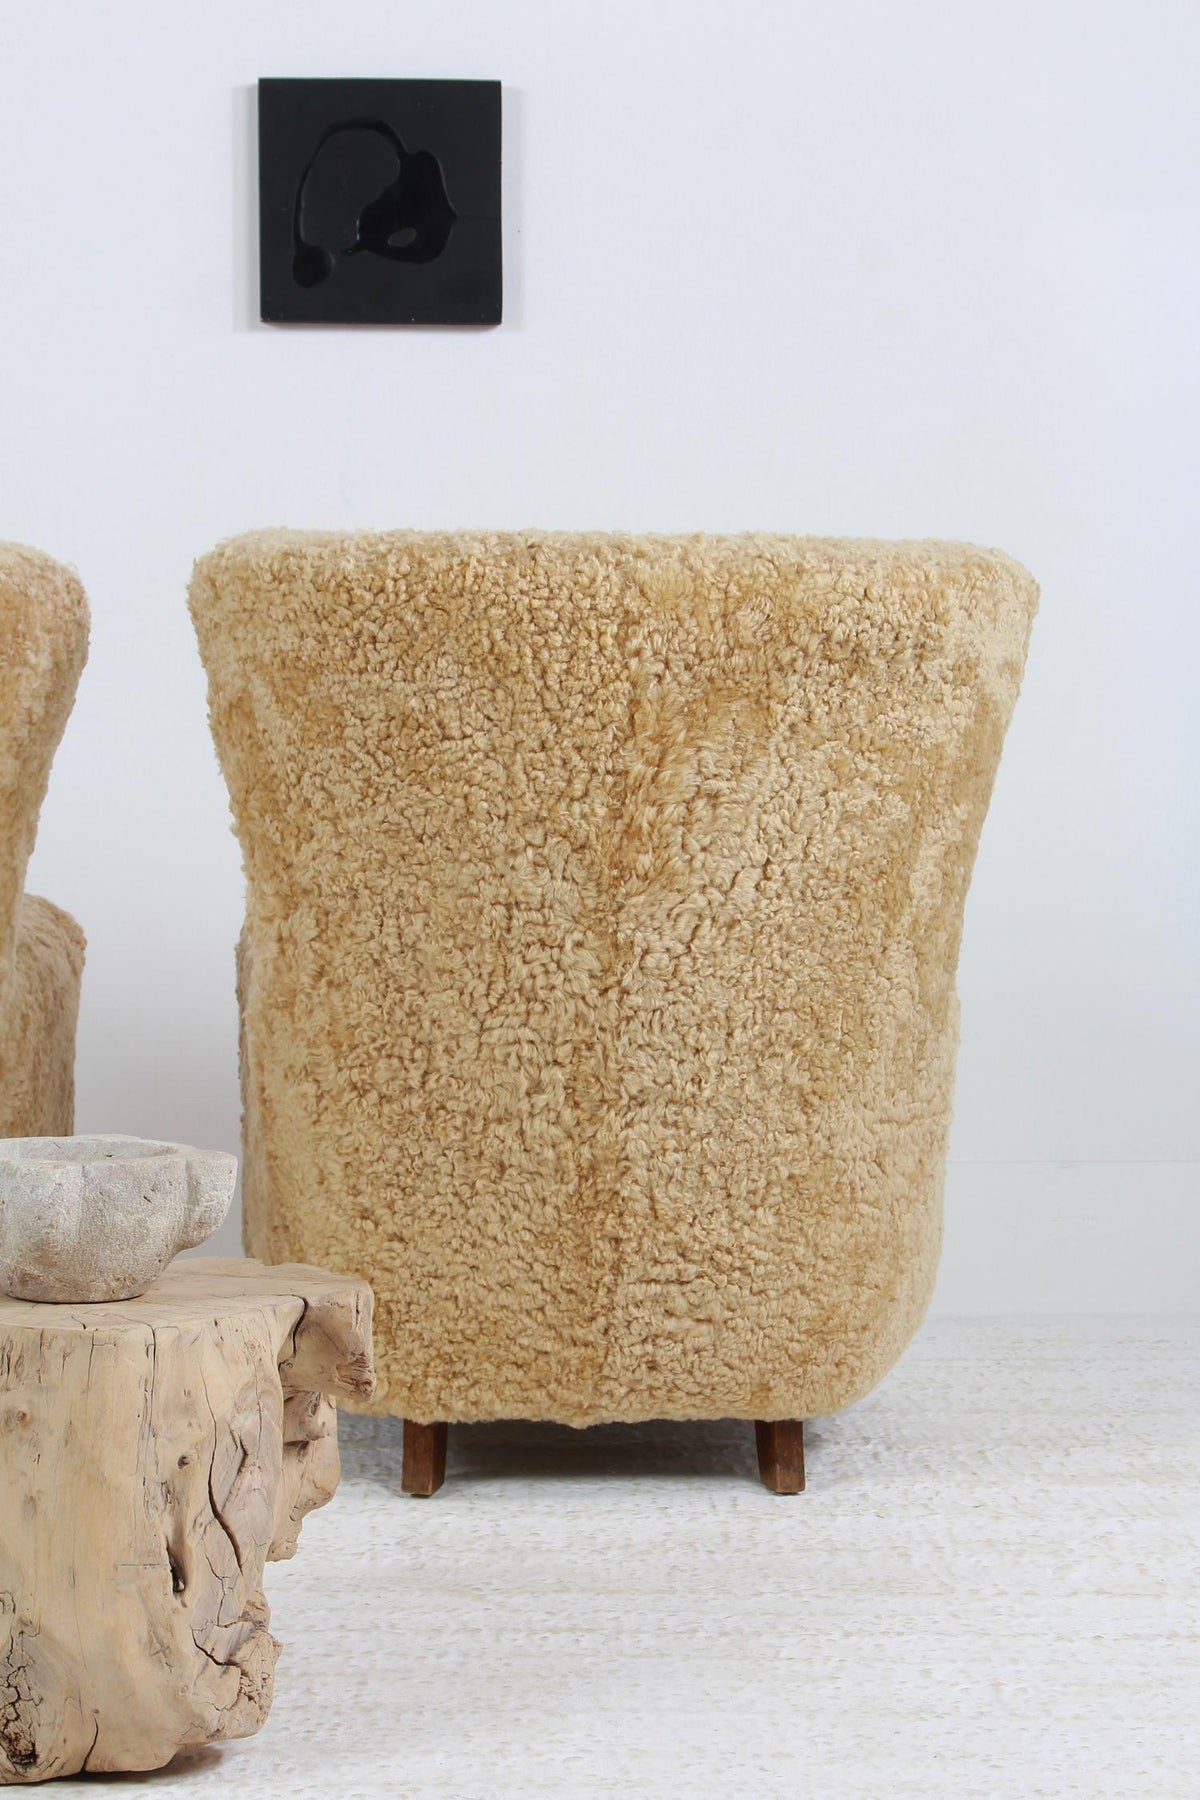 SUMPTUOUS PAIR OF DANISH HIGH-BACK LOUNGE CHAIRS IN HONEY COLOURED SHEEPSKIN